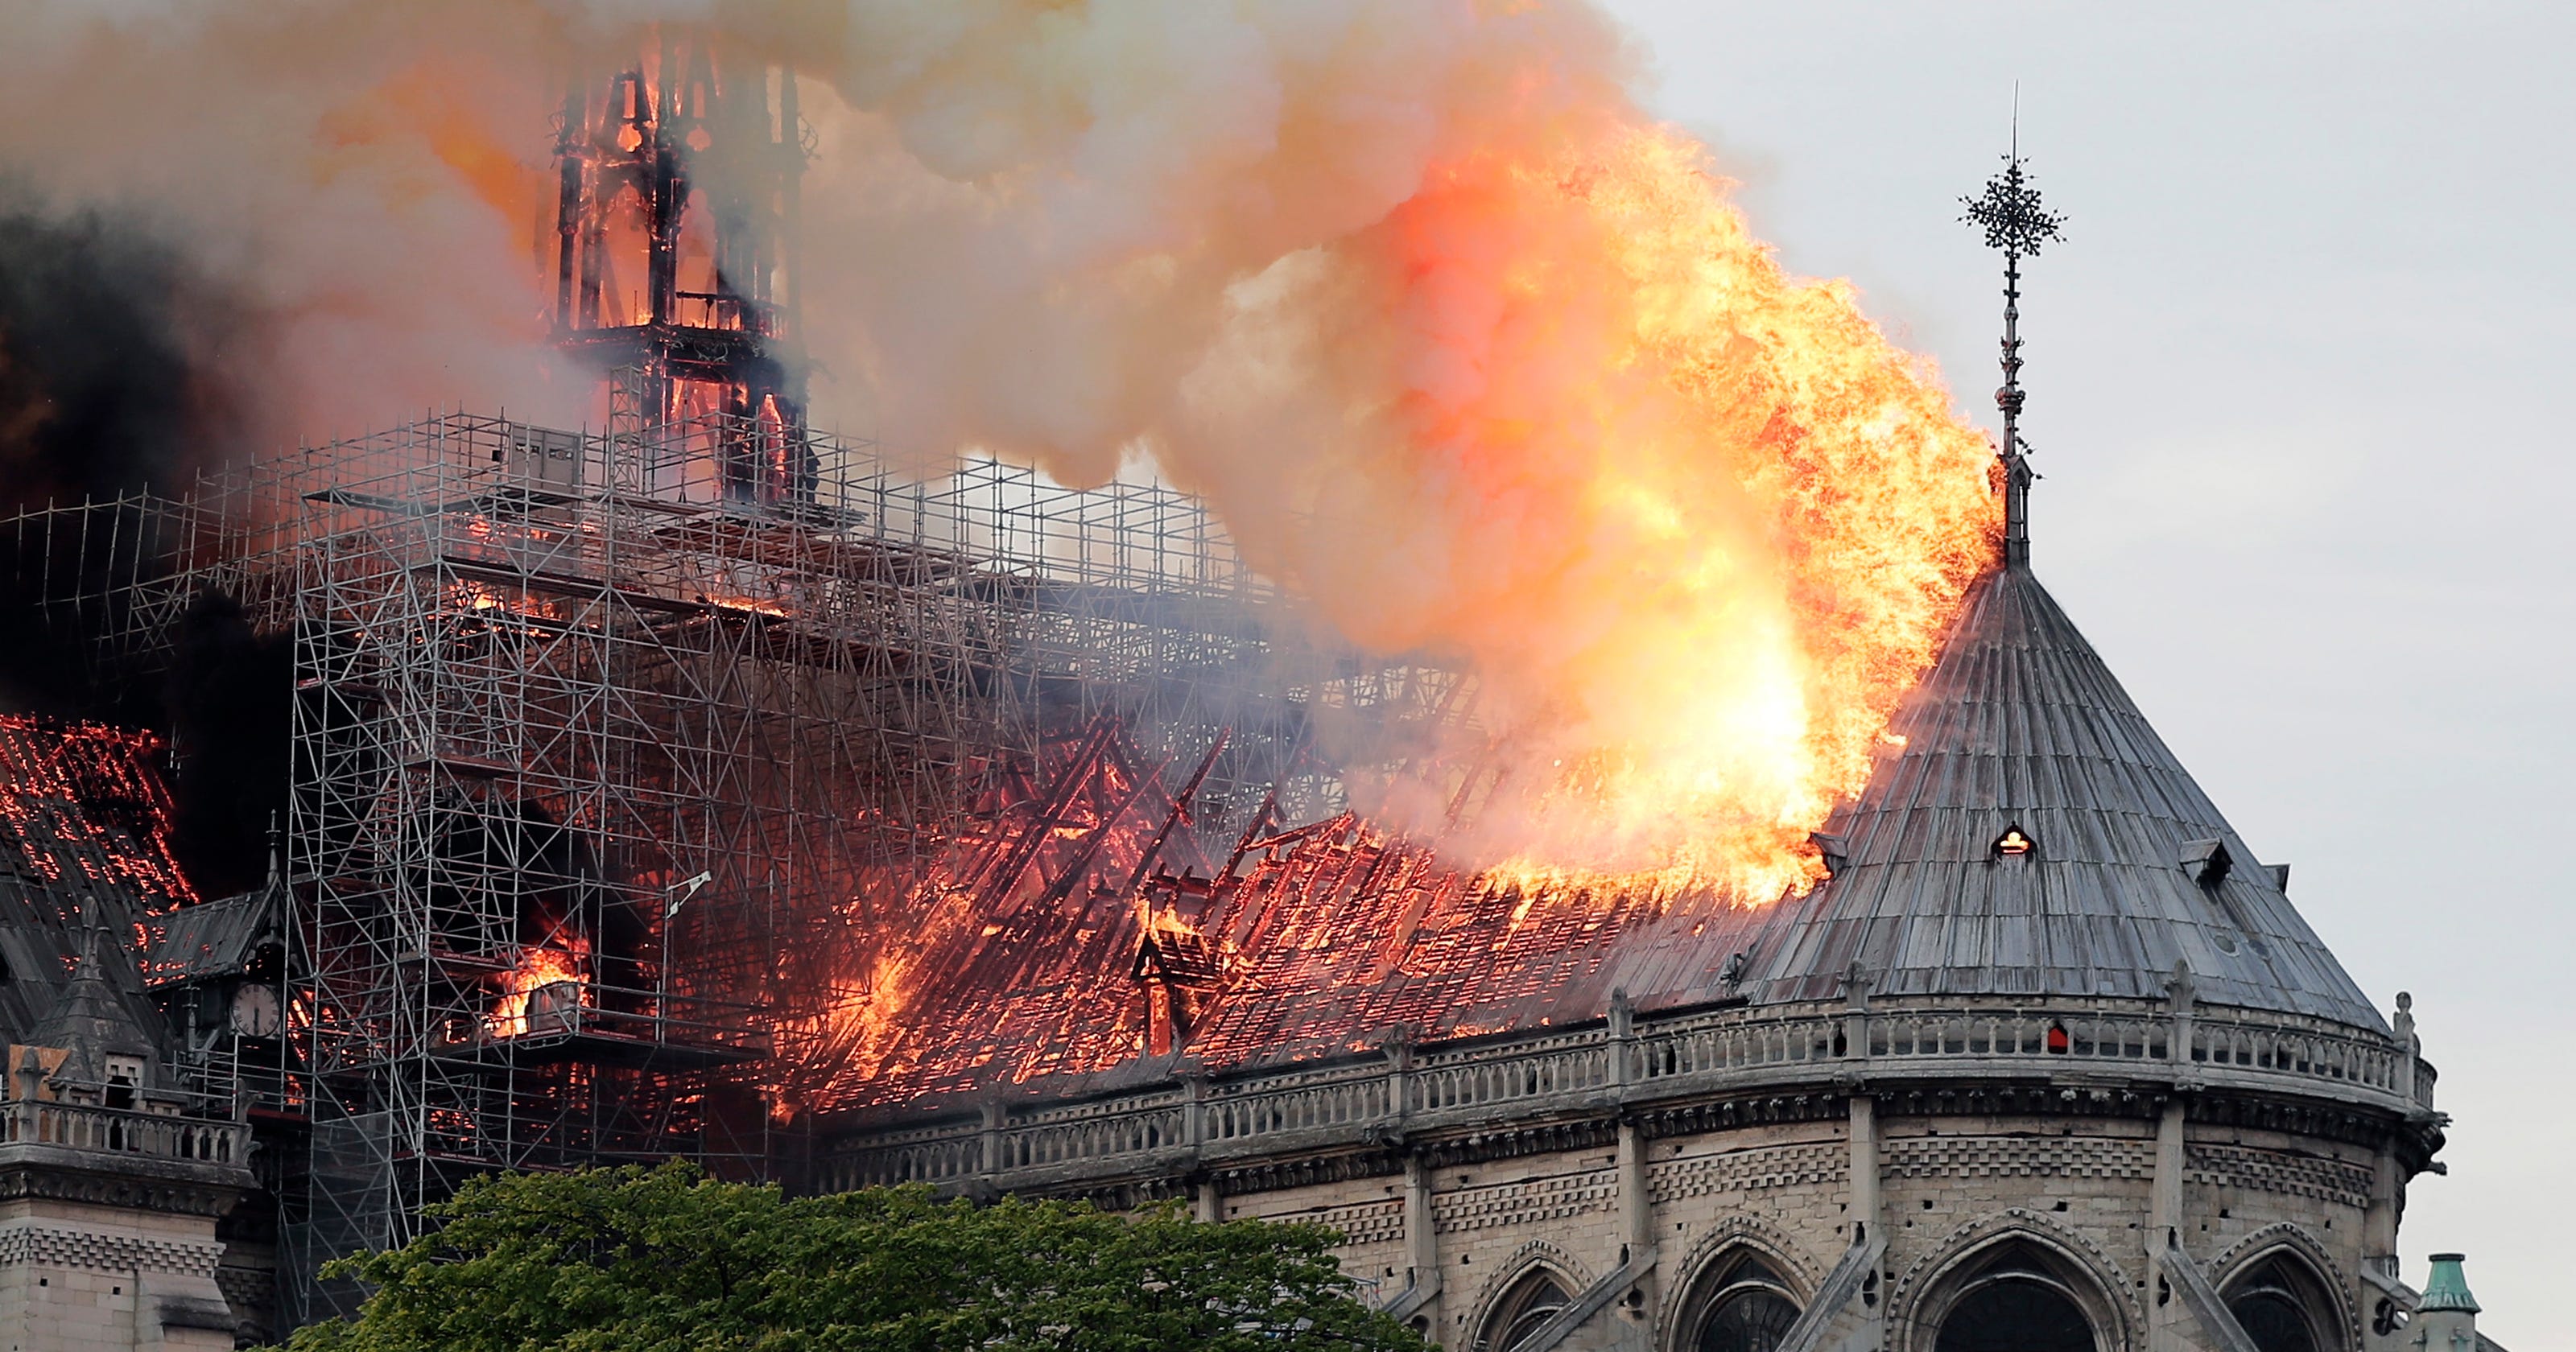 Notre Dame Cathedral fire: In Paris, France's identity crisis blazes